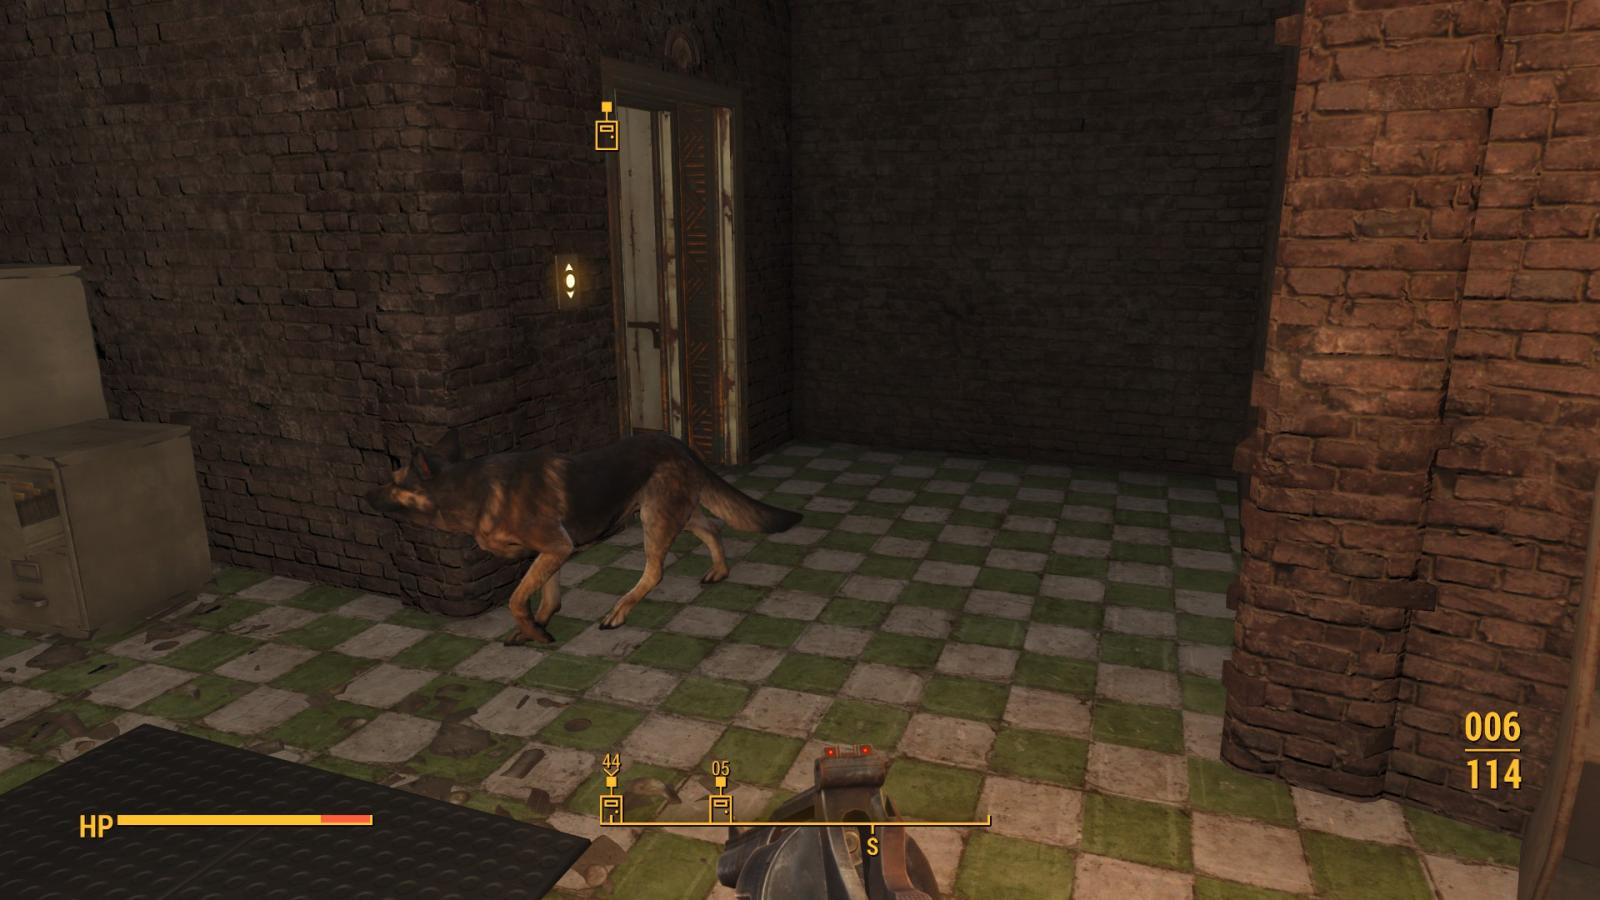 Dogmeat spawned with me after 12 levels of absence. 